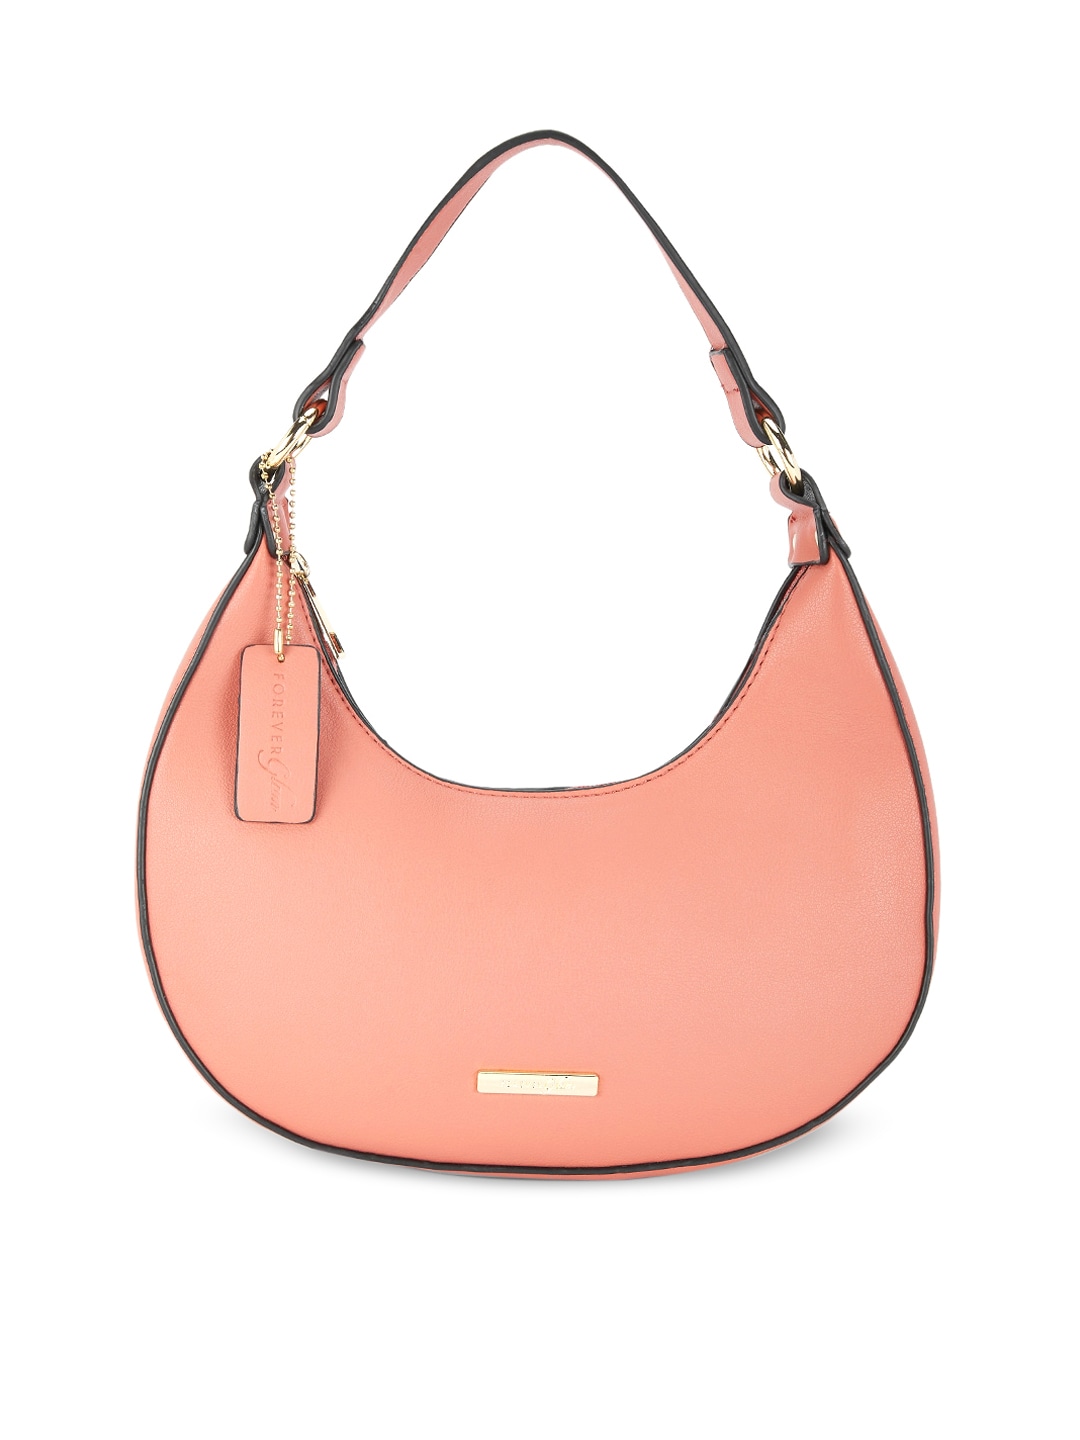 Forever Glam by Pantaloons Pink PU Half Moon Hobo Bag with Tasselled Price in India